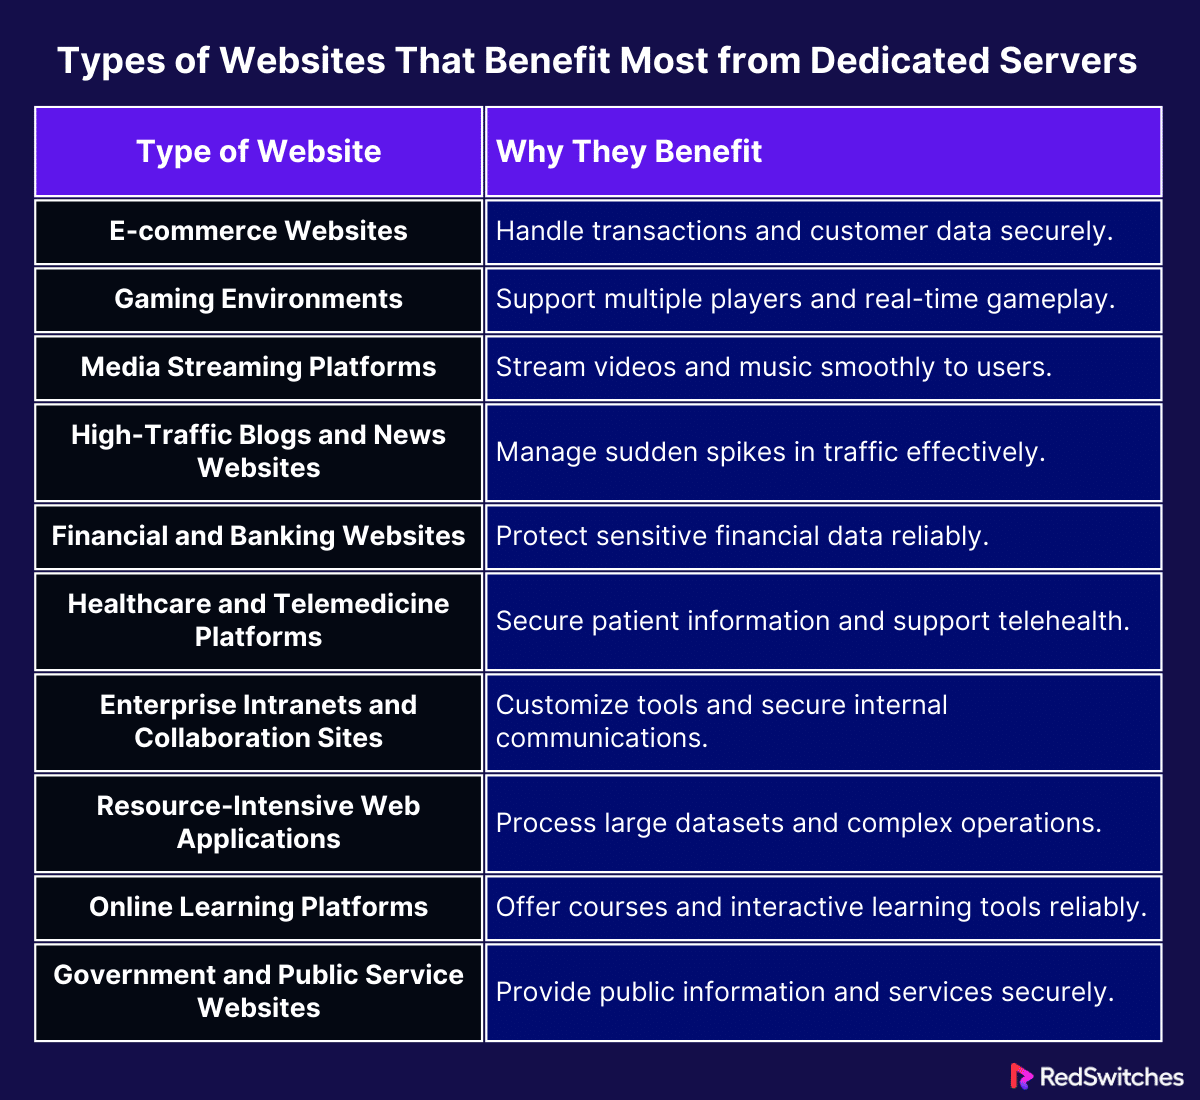 Types of Websites That Benefit Most from Dedicated Servers
